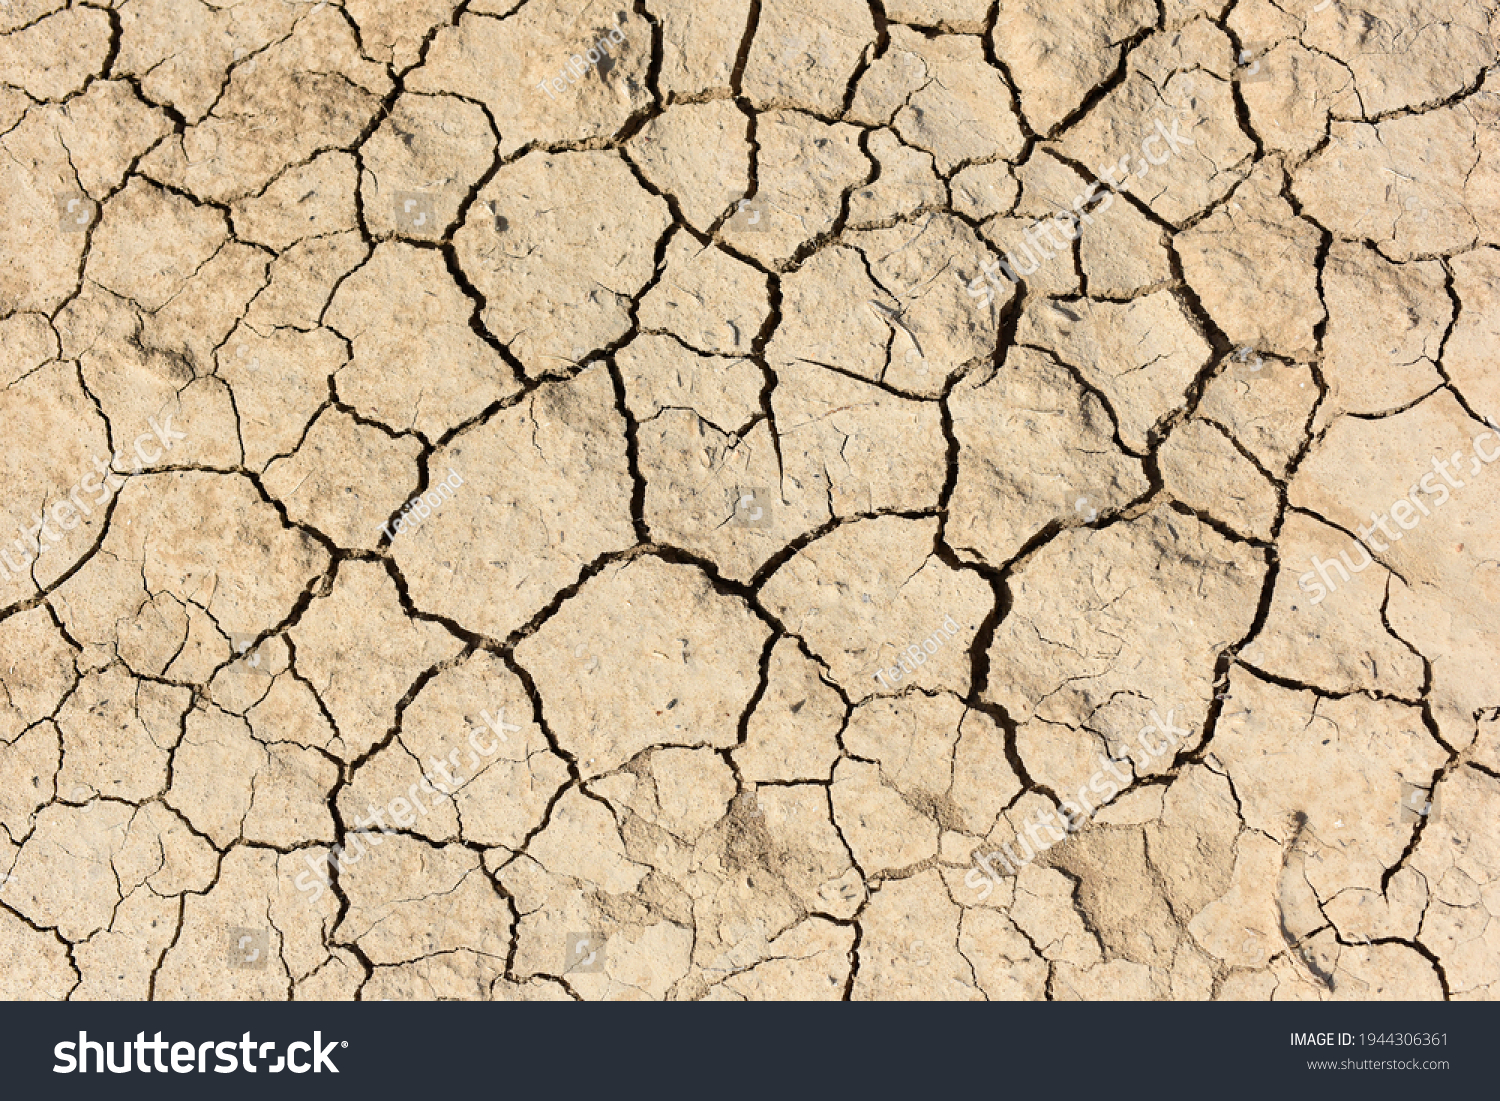 Background, texture of dry cracked soil. Soil drought. Deep cracks. Dried soil. Environmental protection. World Day to Combat Desertification and Drought. Ecology and Nature Conservation. #1944306361